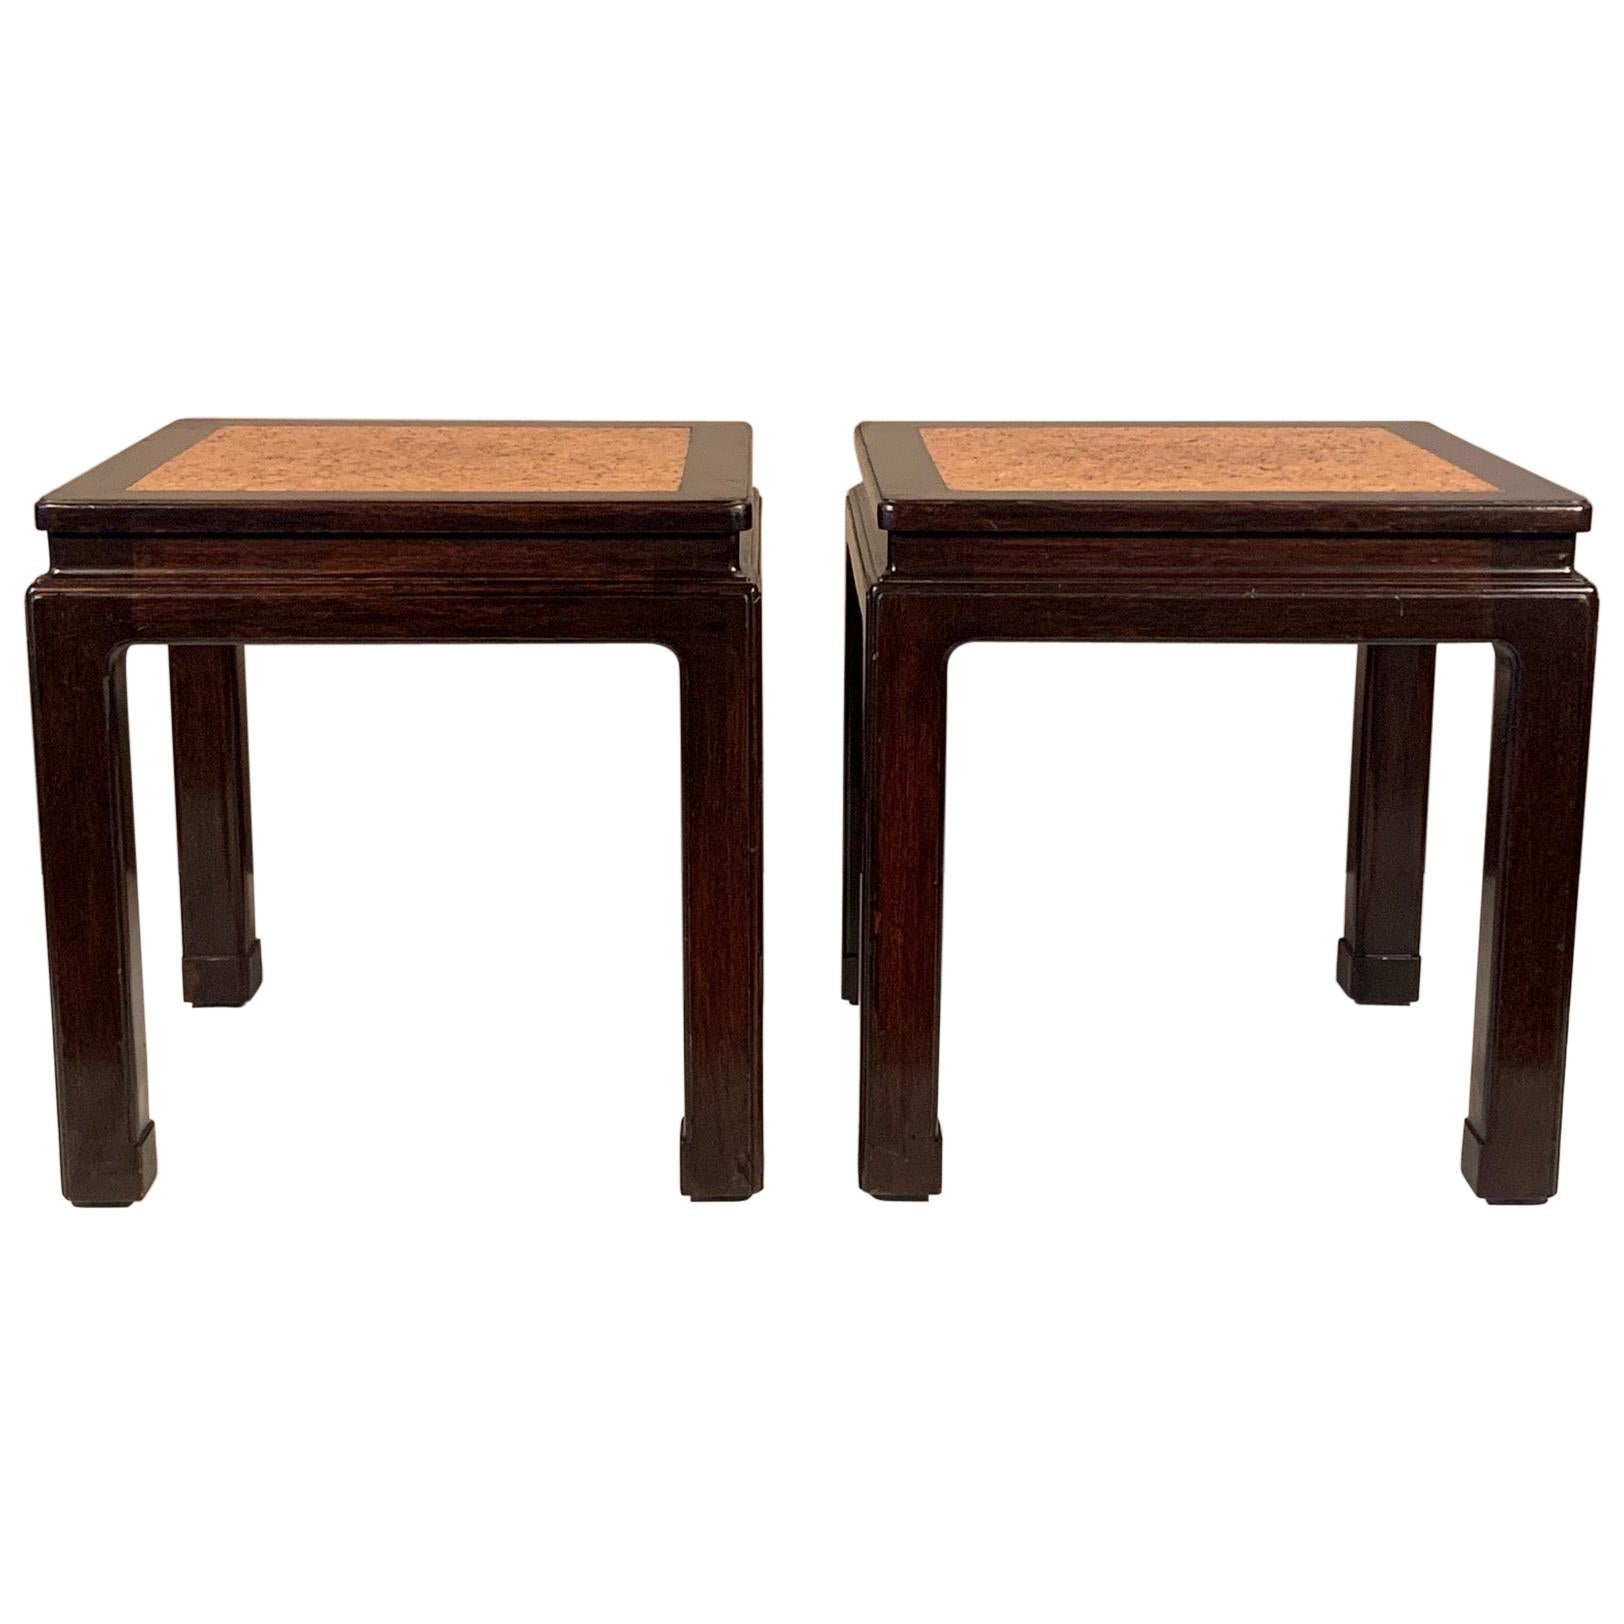 A Pair of Dunbar Occasional Tables Asian Style with Cork Tops For Sale